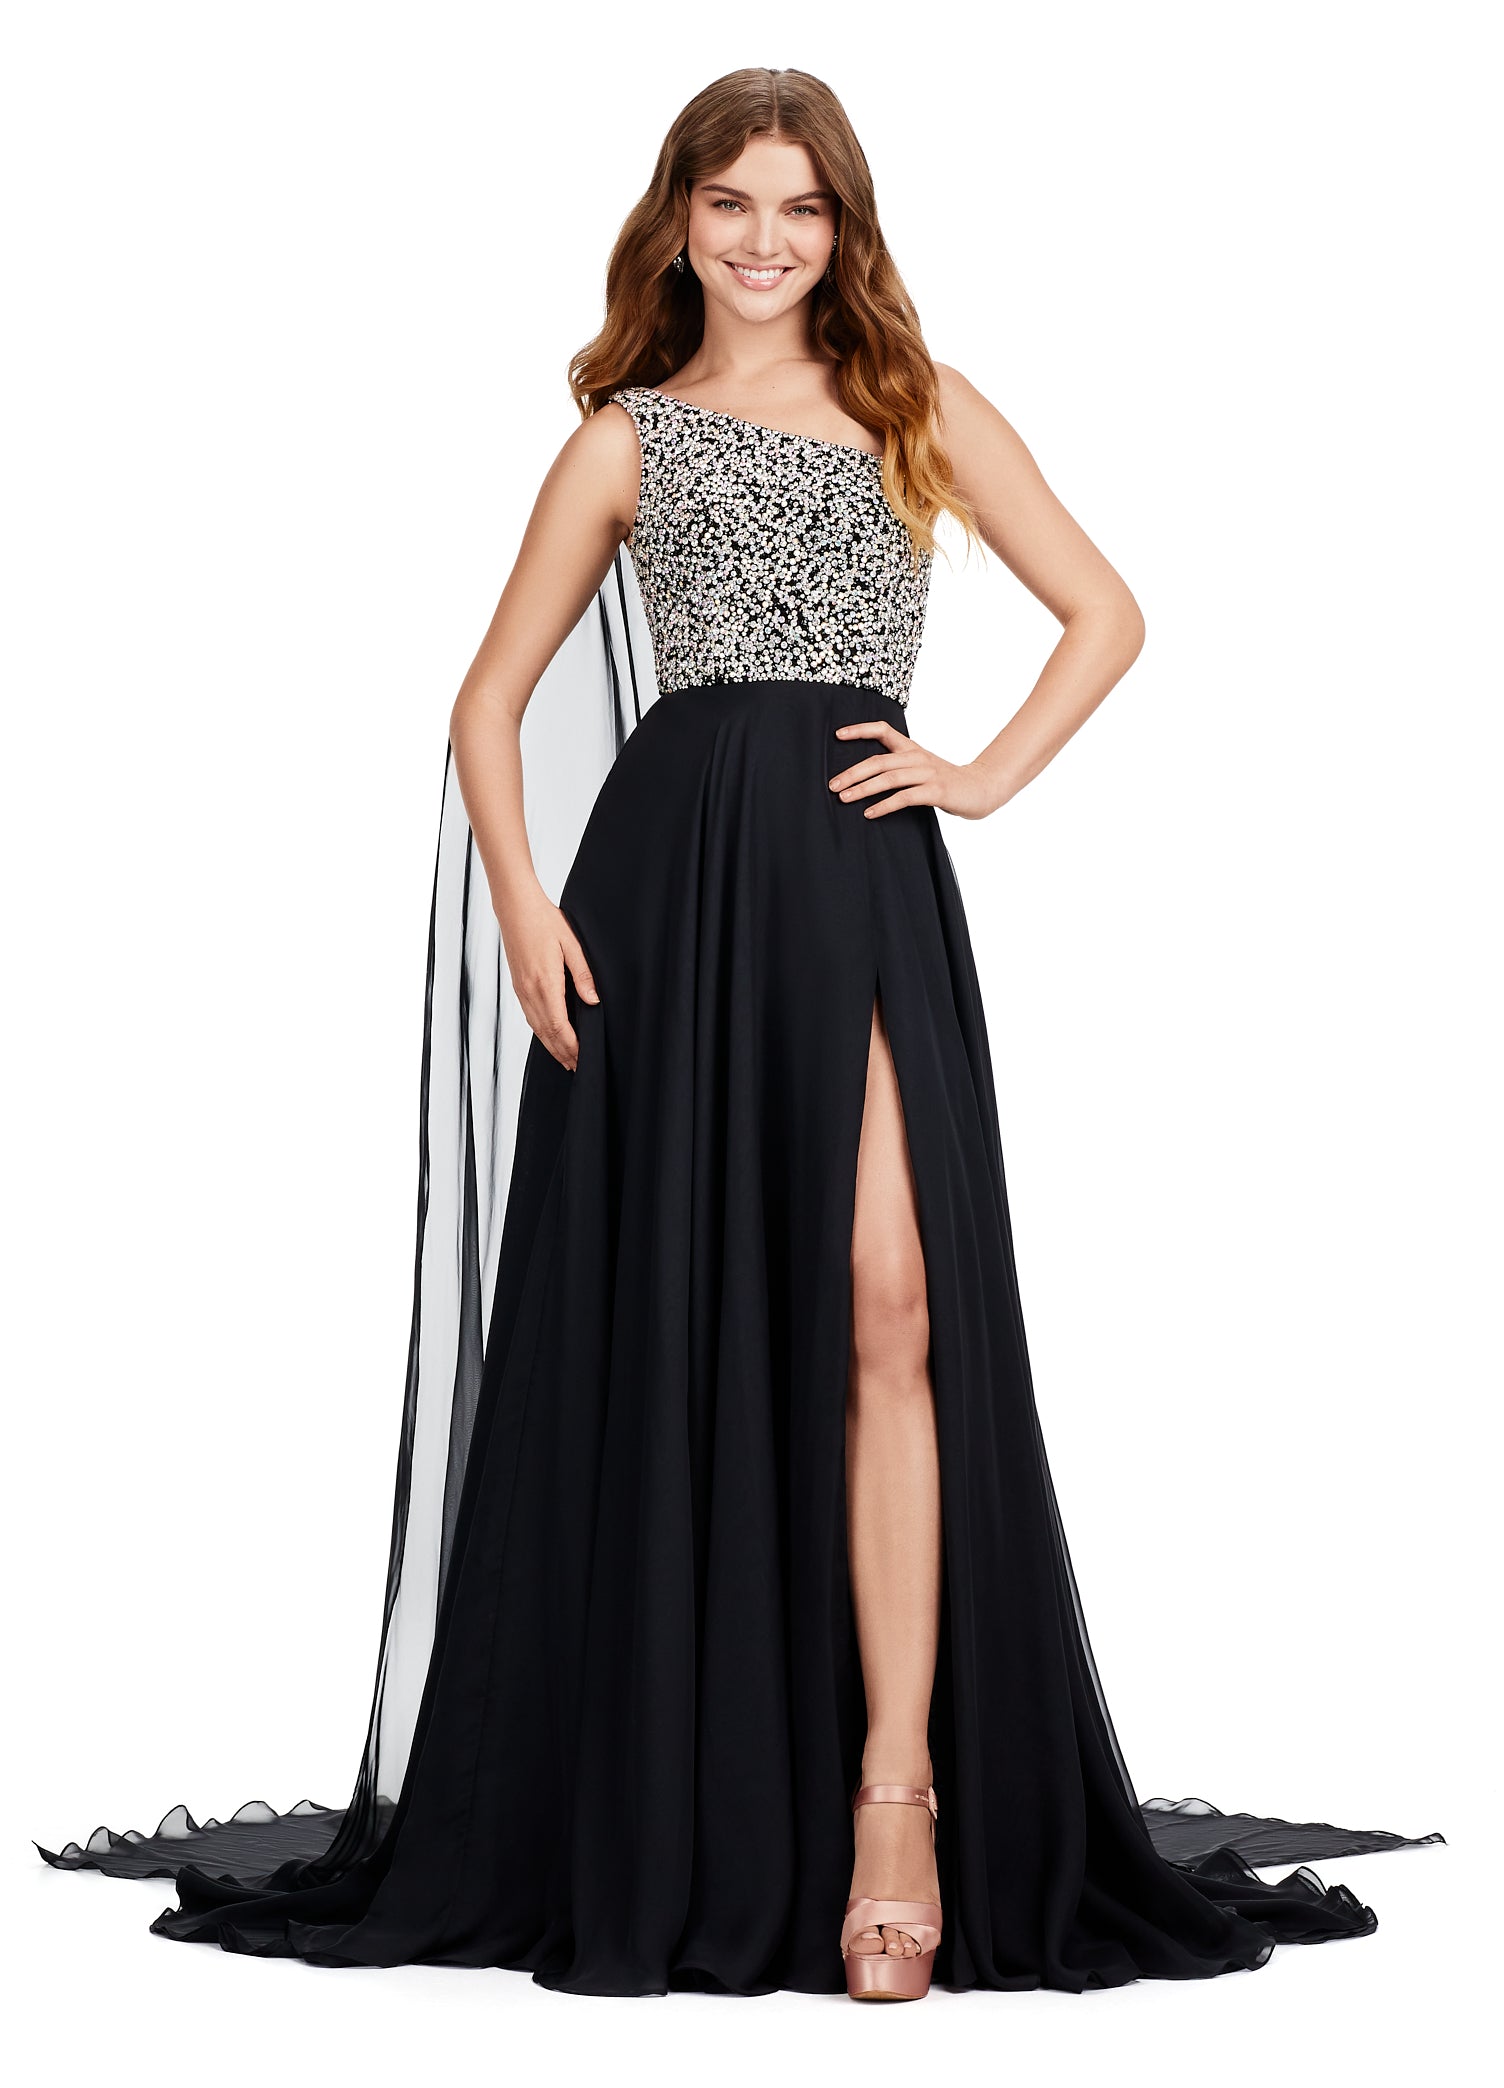 Introducing the show-stopping Ashley Lauren 11482 Long Prom Dress! This elegant gown features a one-shoulder design and flowing chiffon fabric, perfect for any formal occasion. The stunning beaded bustier adds a touch of sparkle and glamour, making you the center of attention. Elevate your style with this must-have pageant gown. A dress fit for a queen!